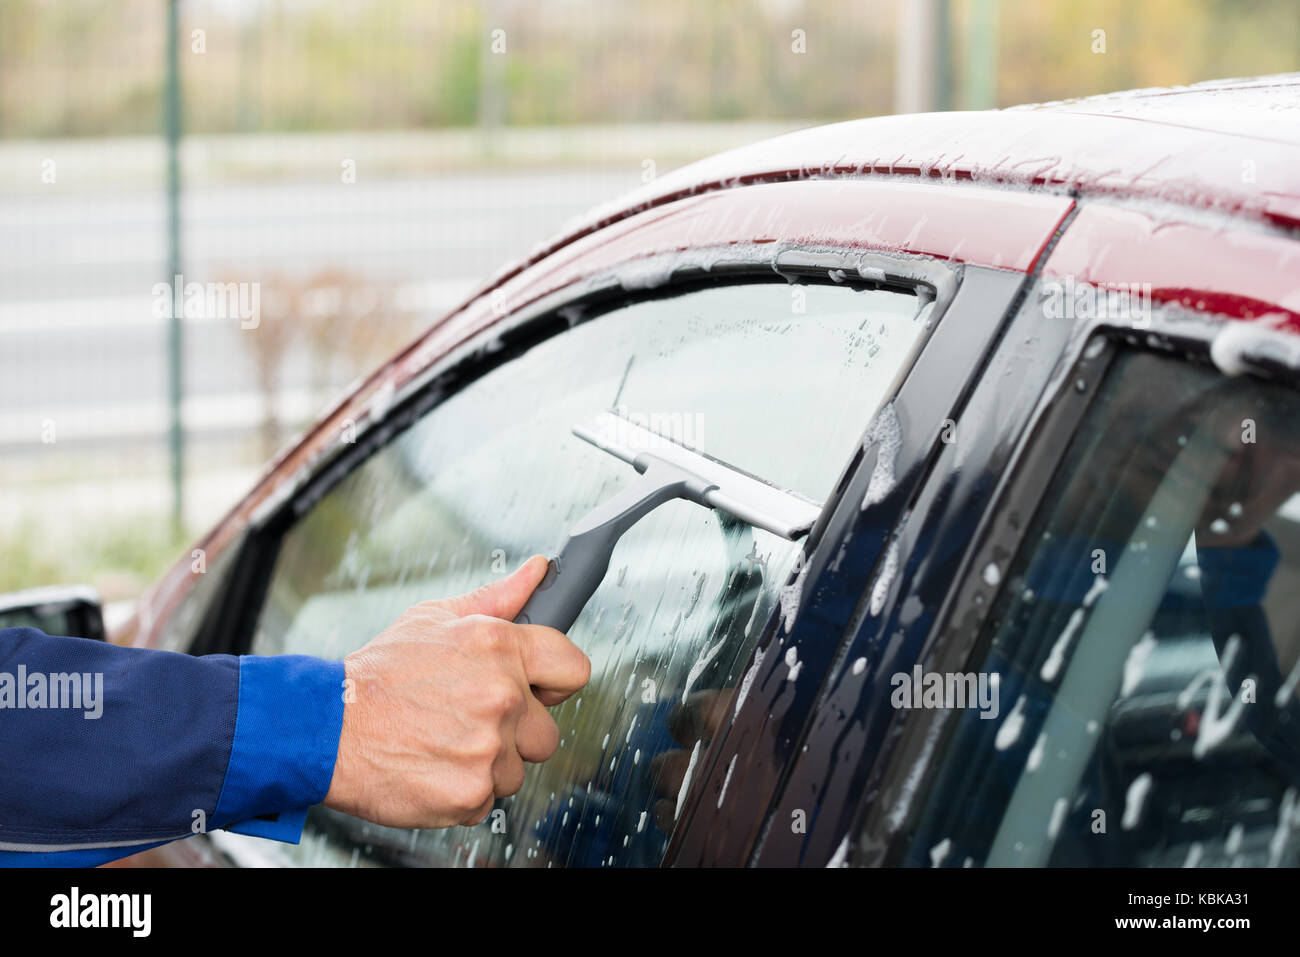 Cropped image of serviceman cleaning car window with wiper at service station Stock Photo